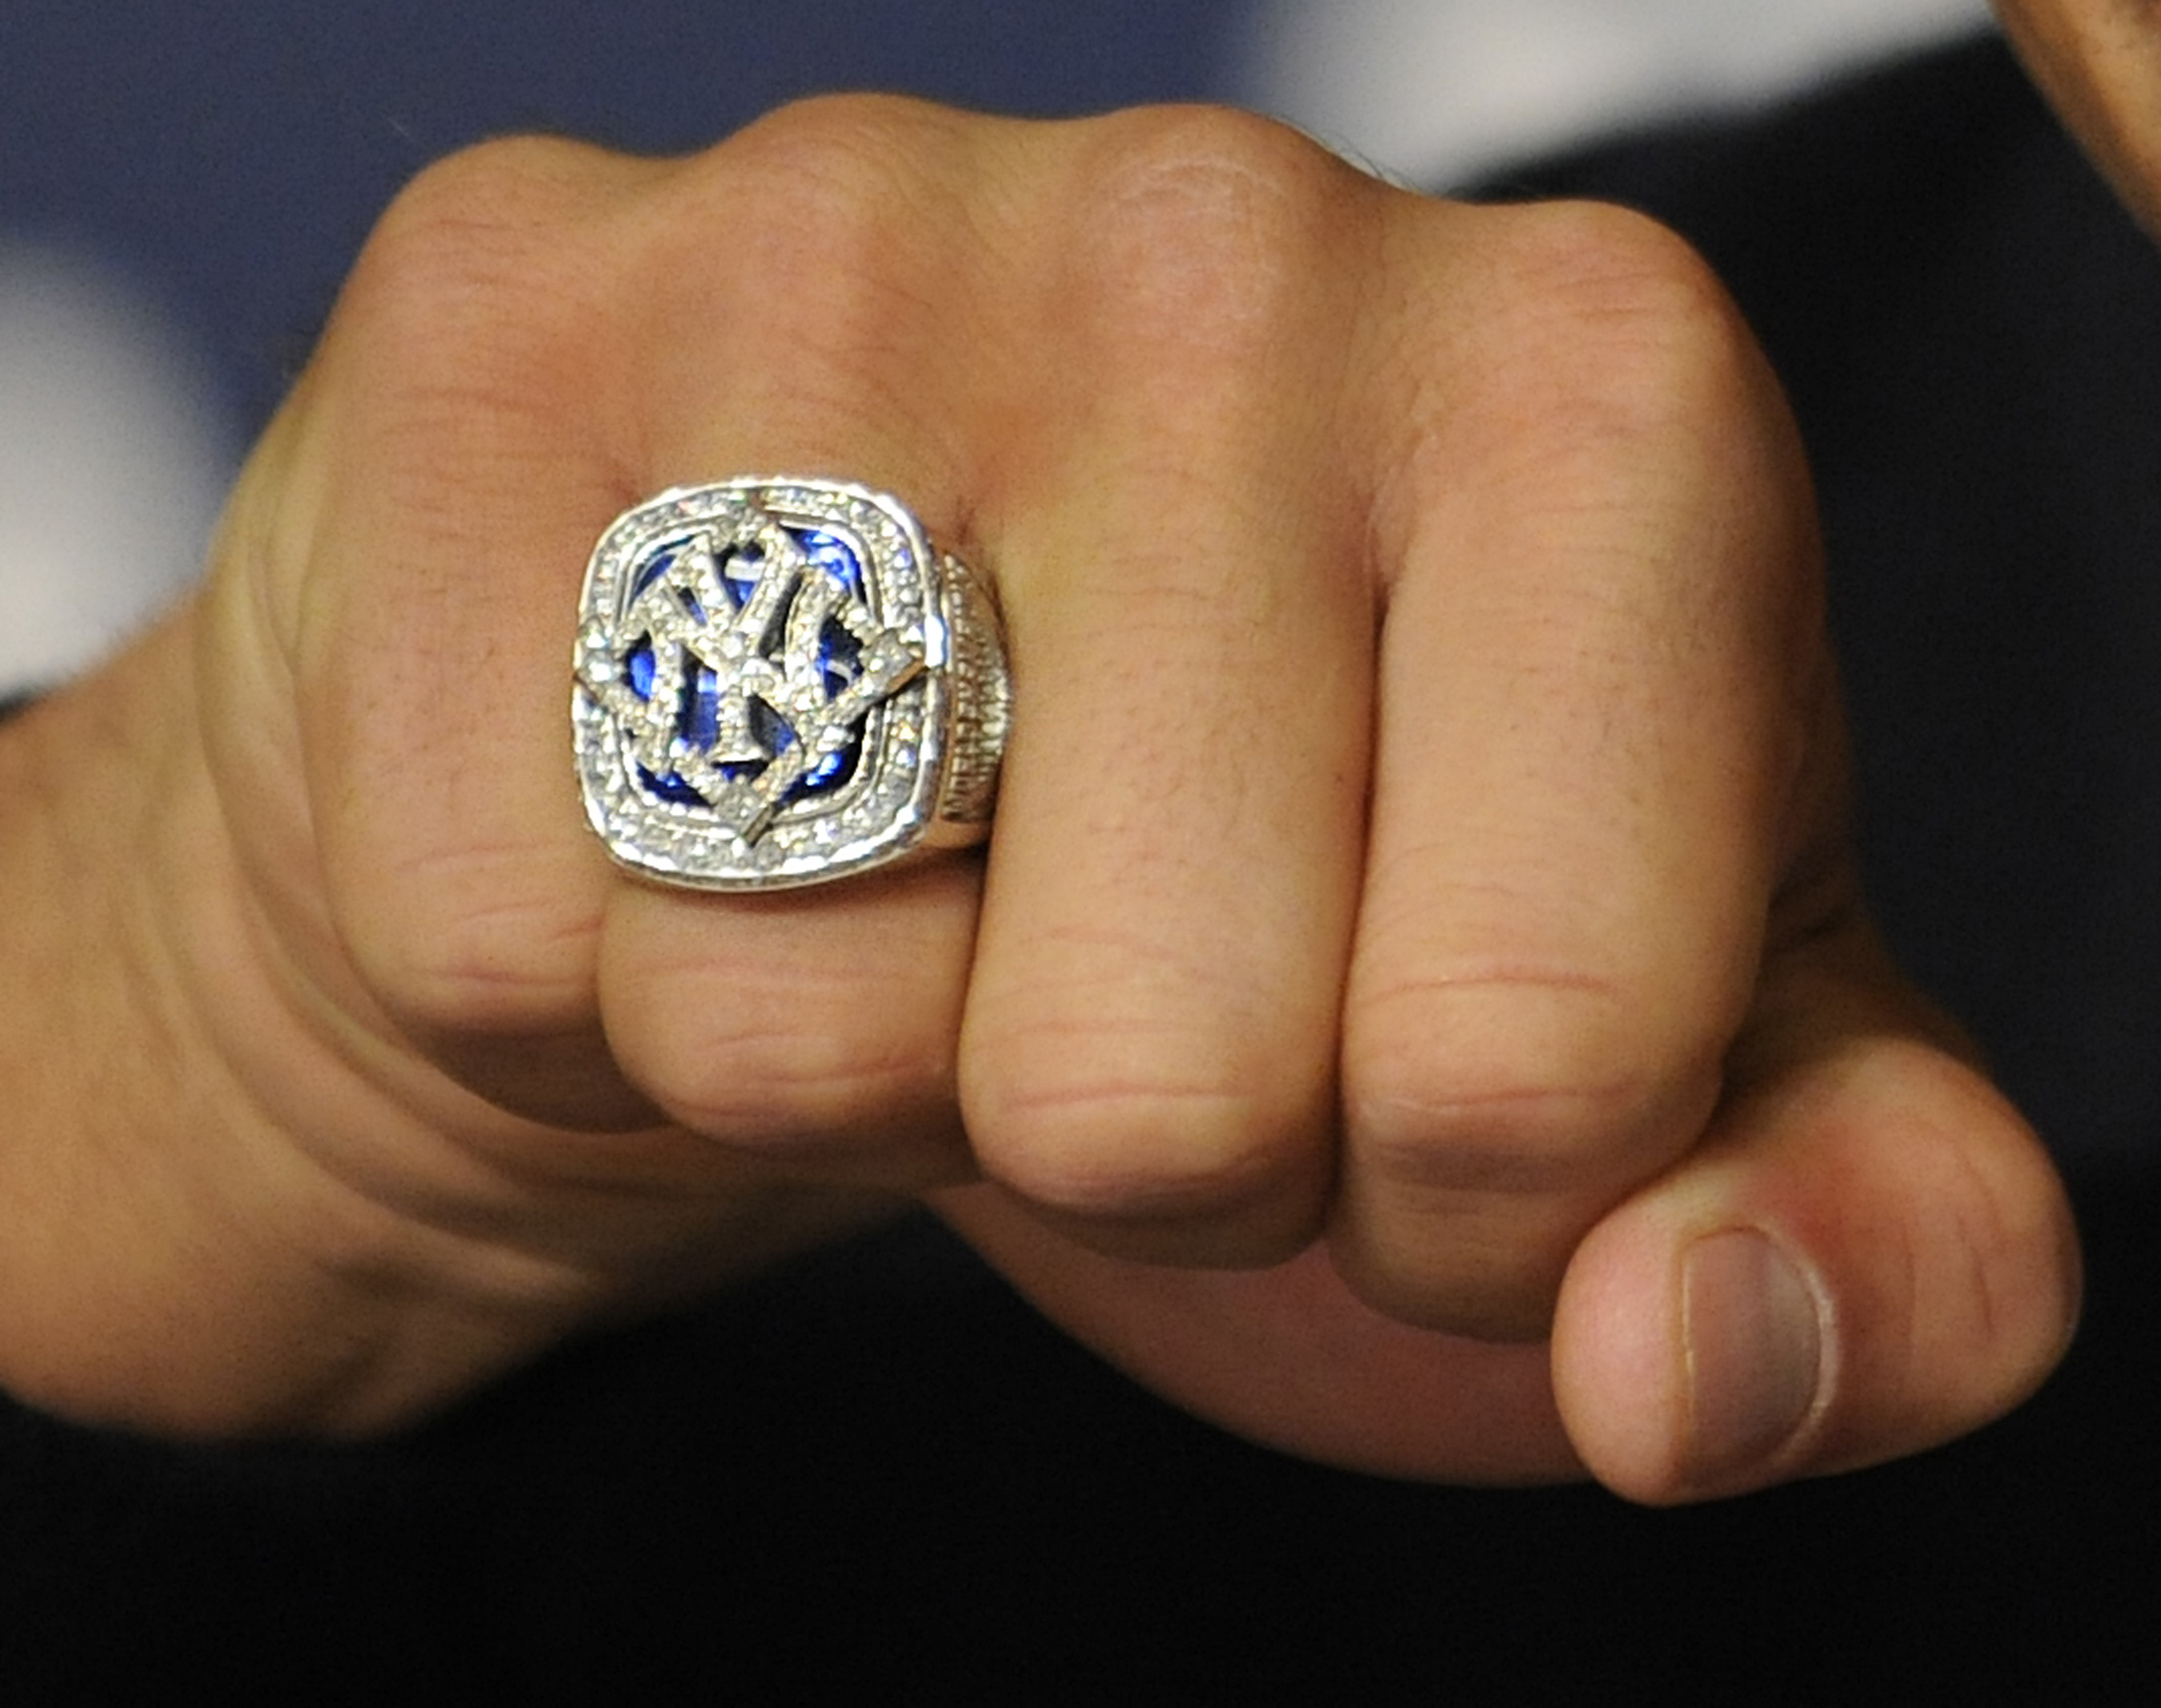 Everything you need to know about World Series rings